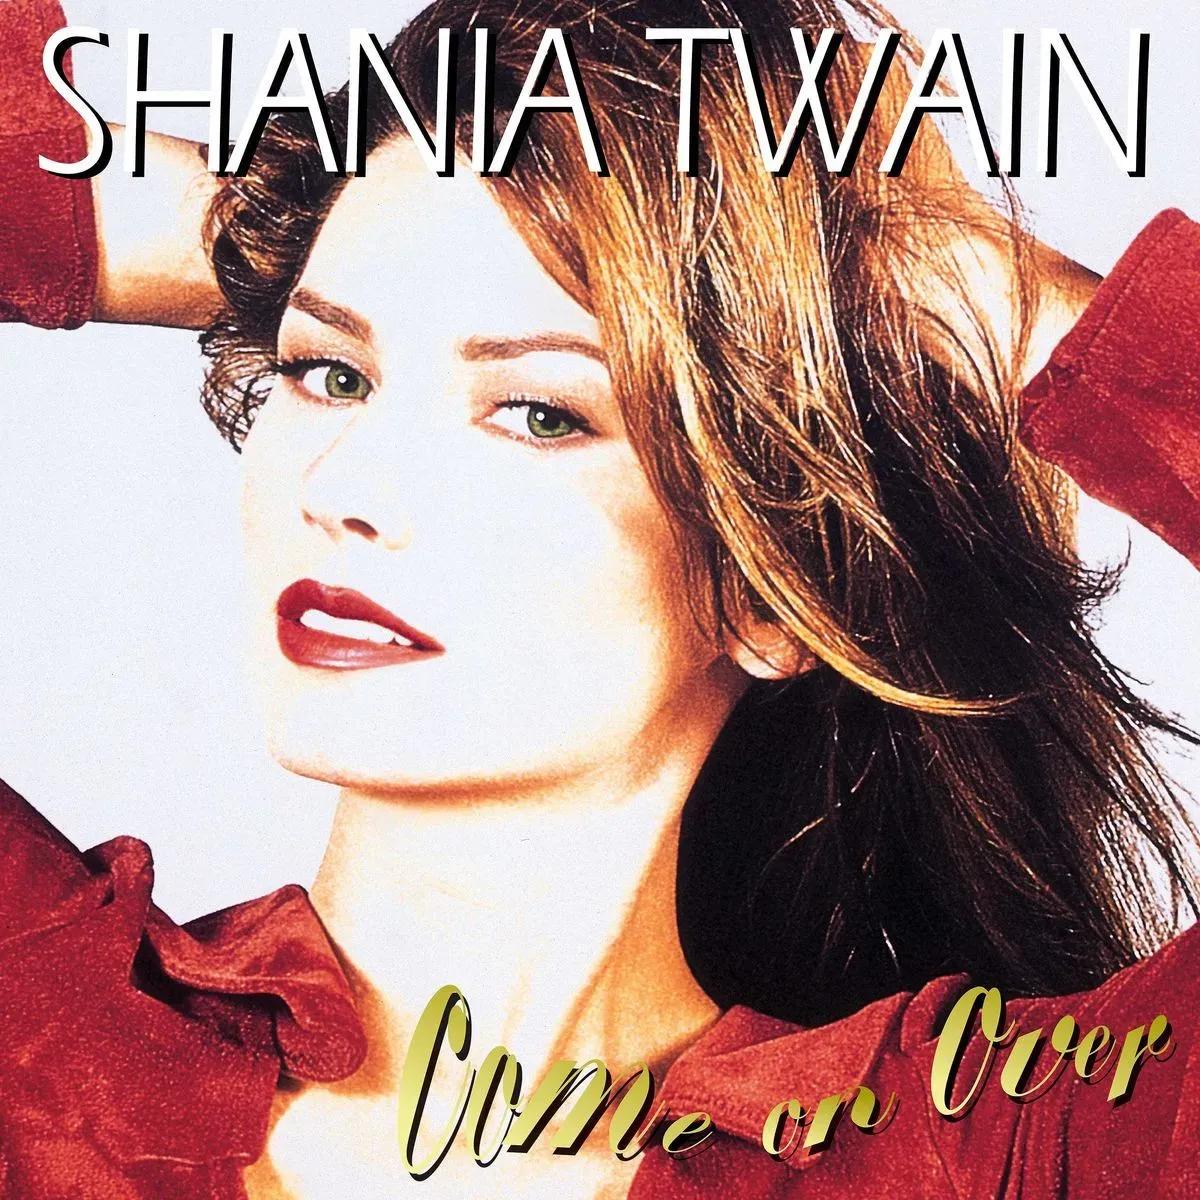 Come On Over - Shania Twain. (LP)